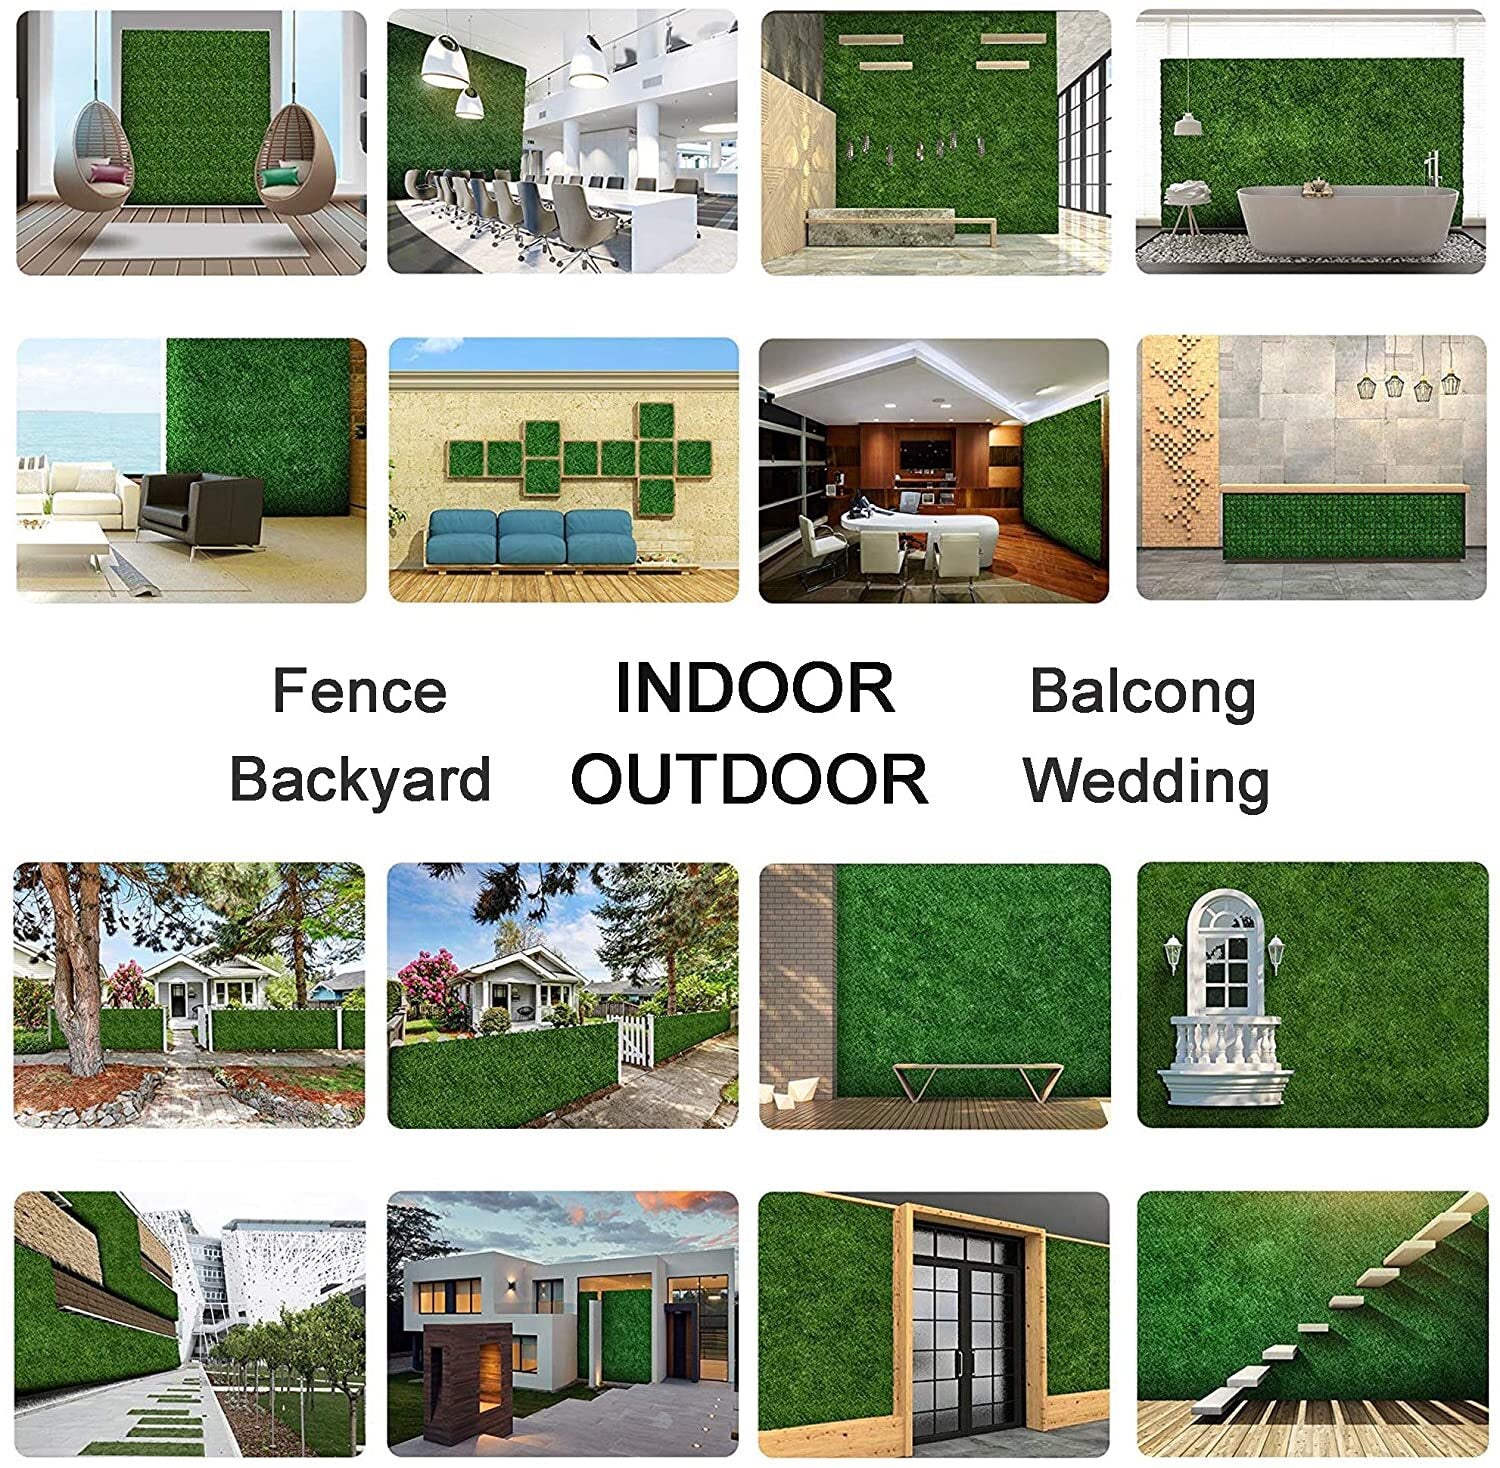 sixteen small pictures shoing different ways you could use artificial plants and wall panels to green up your home business or office.